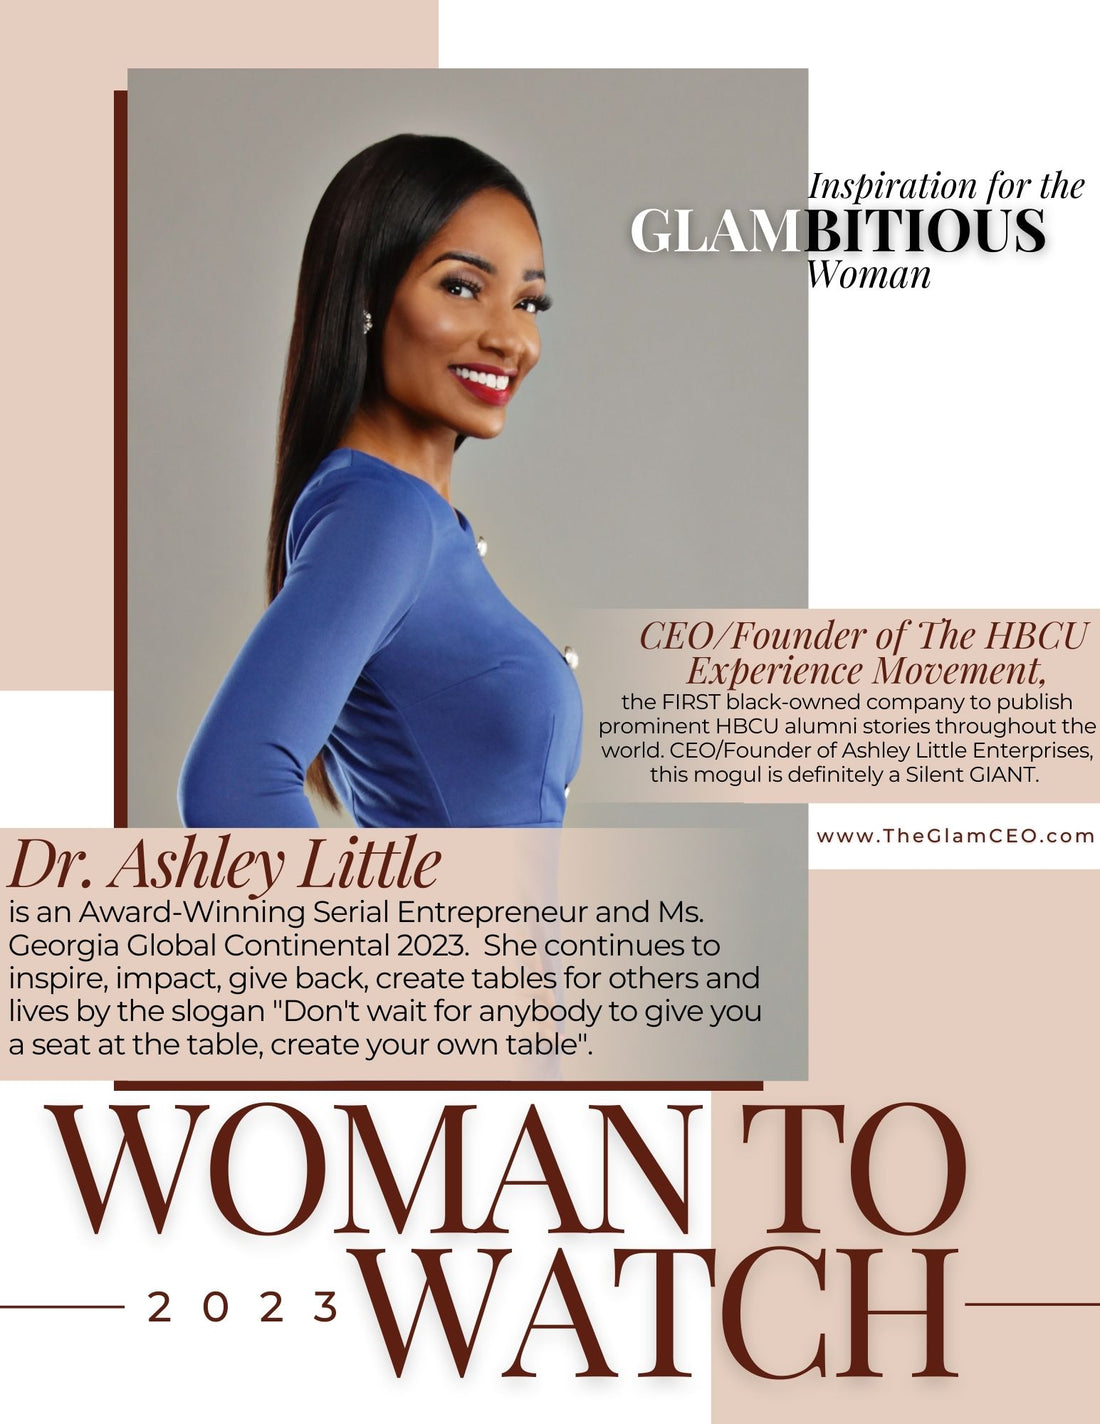 2023 Woman to Watch: Dr. Ashley Little